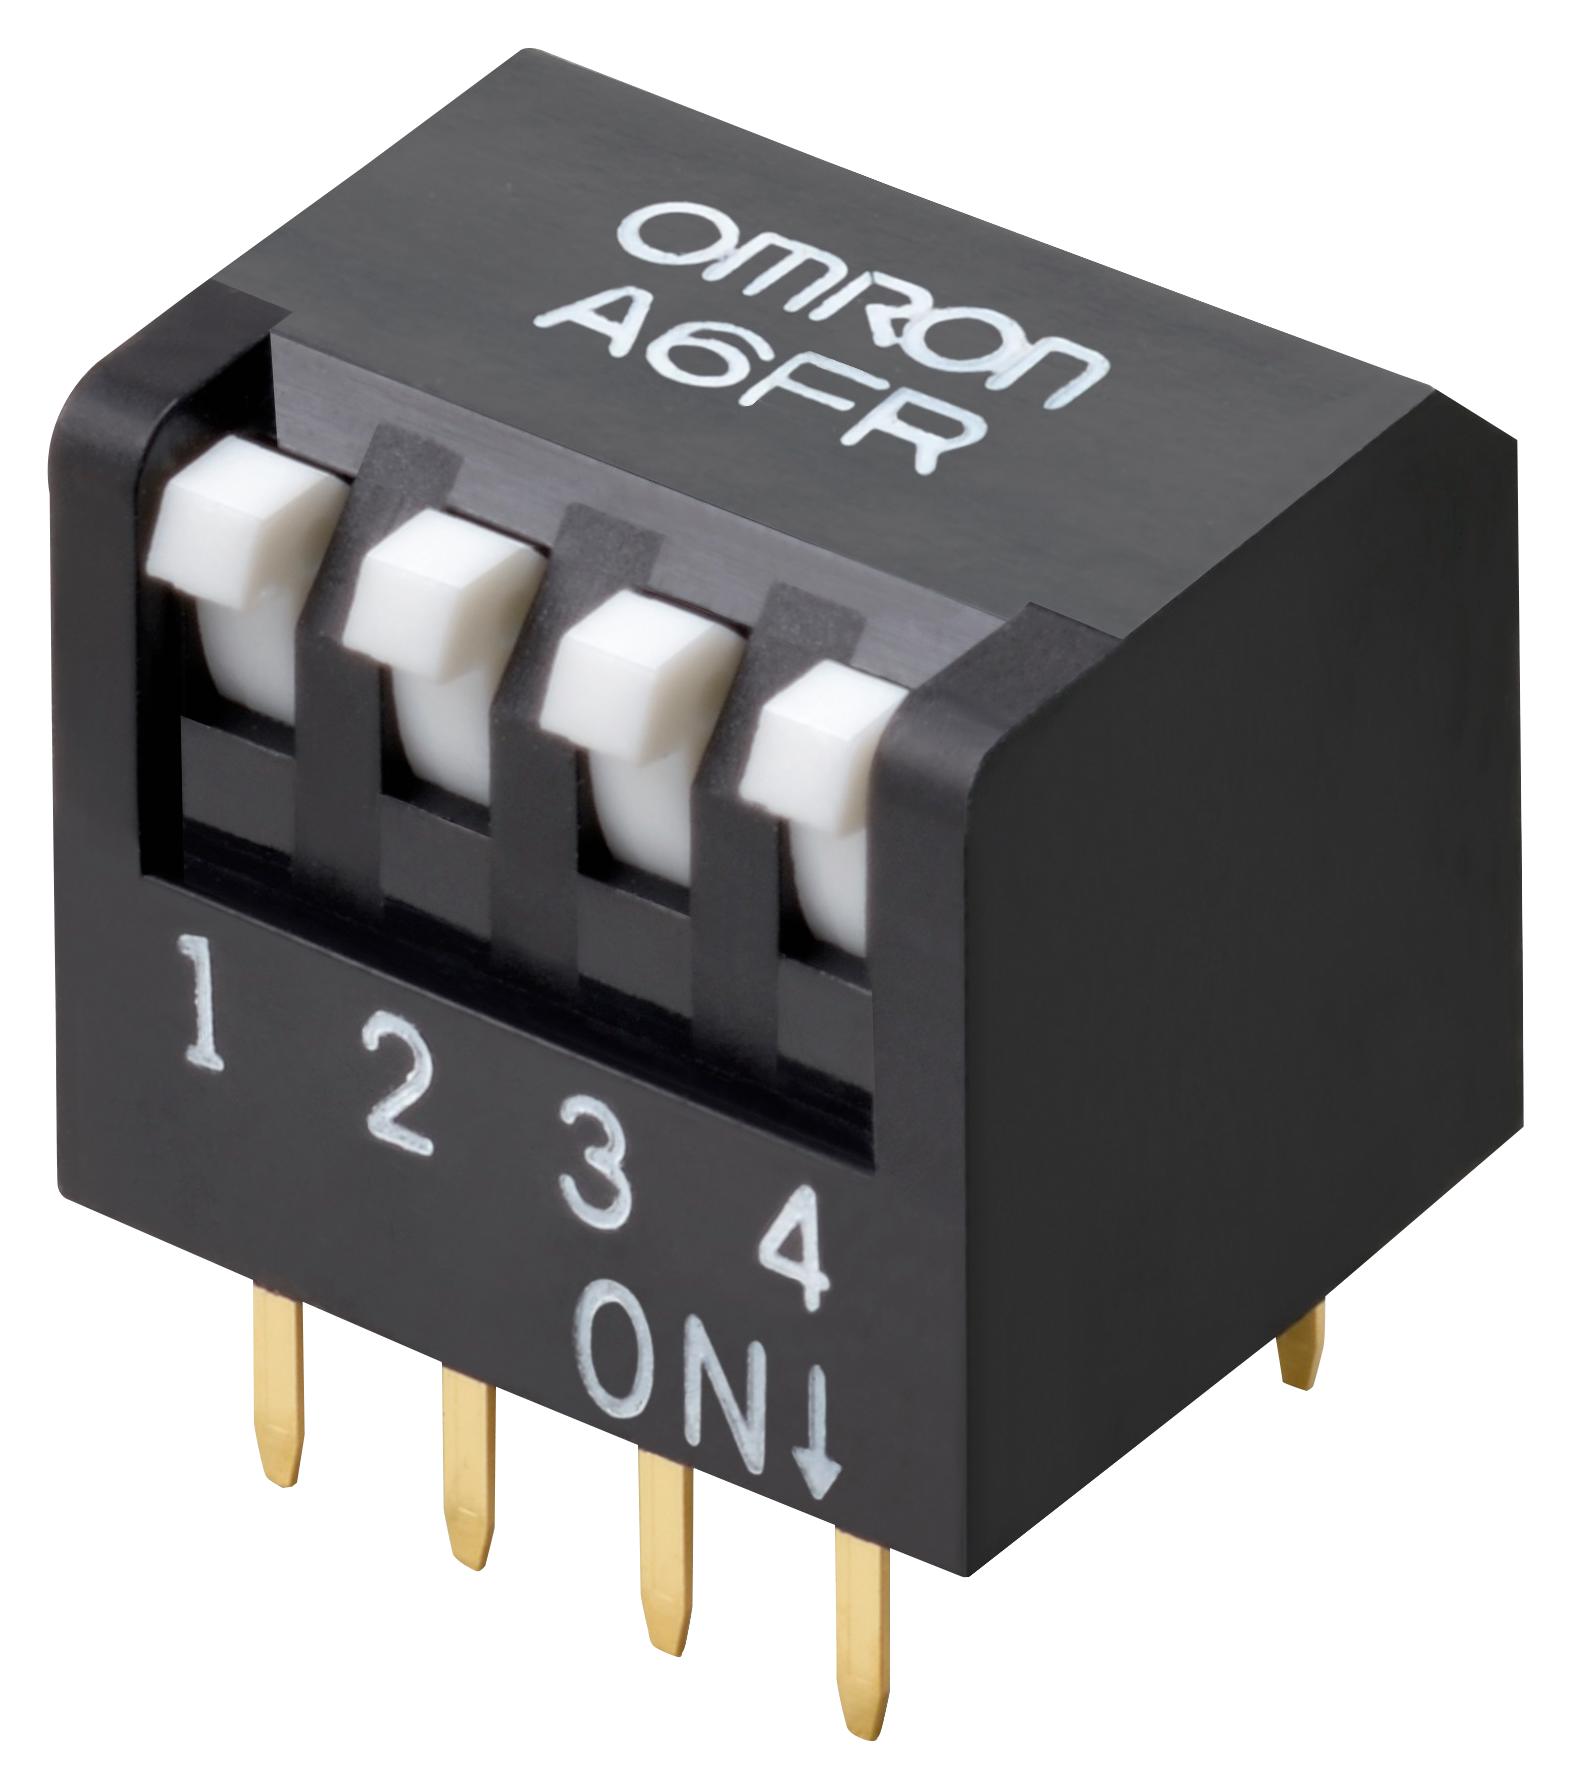 A6FR-0101 DIP SWITCH, 10POS, SPST, PIANO KEY, TH OMRON